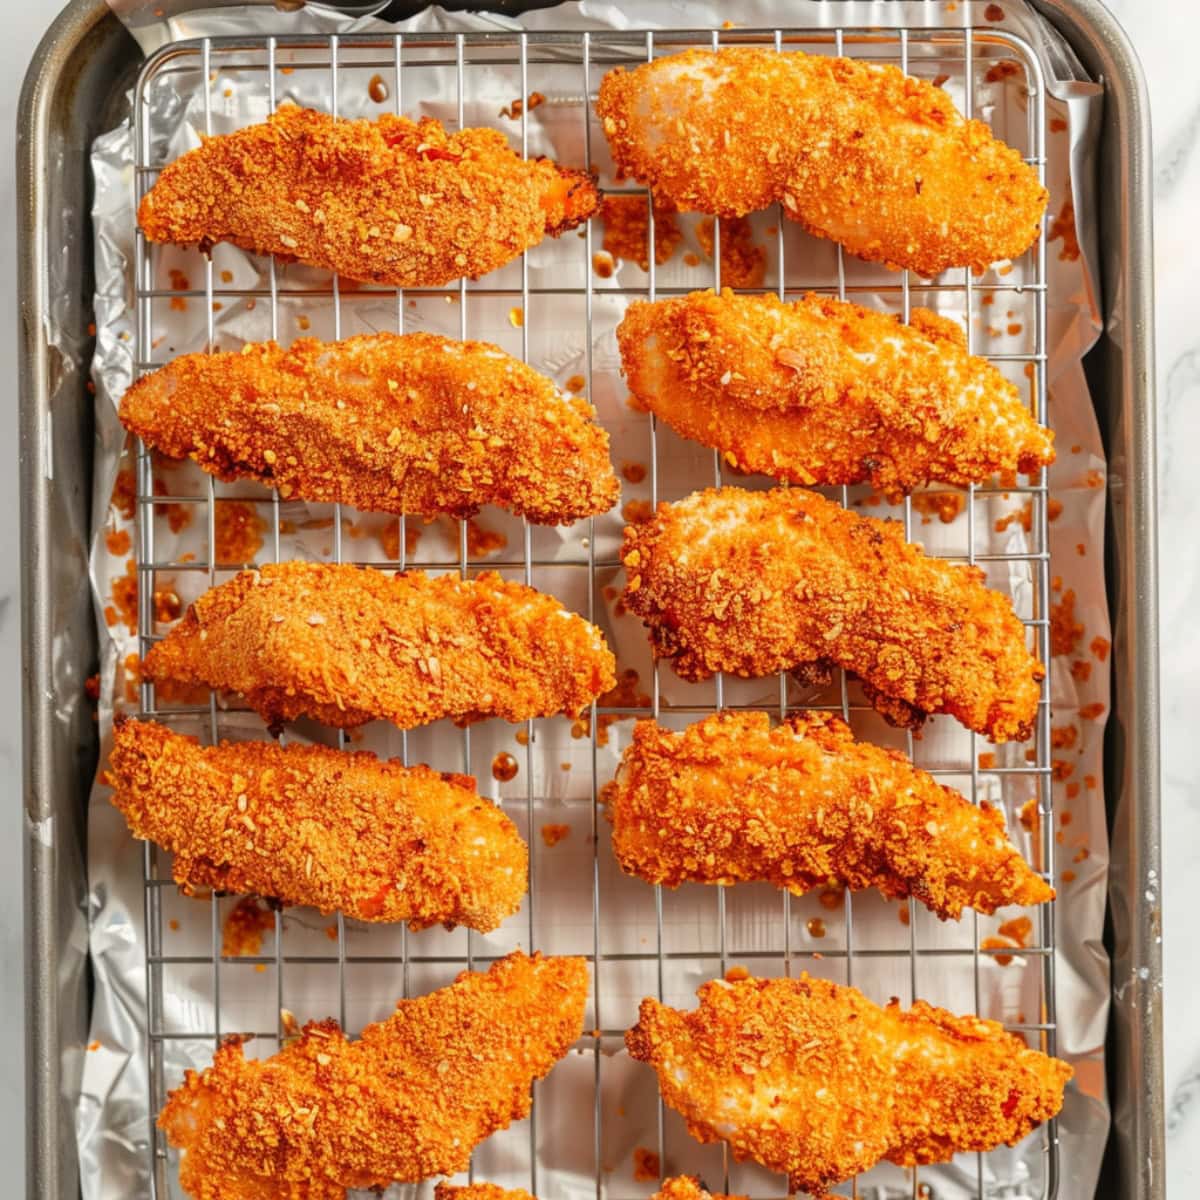 Dorito chicken tenders in a cooling rack with aluminum foil lining.